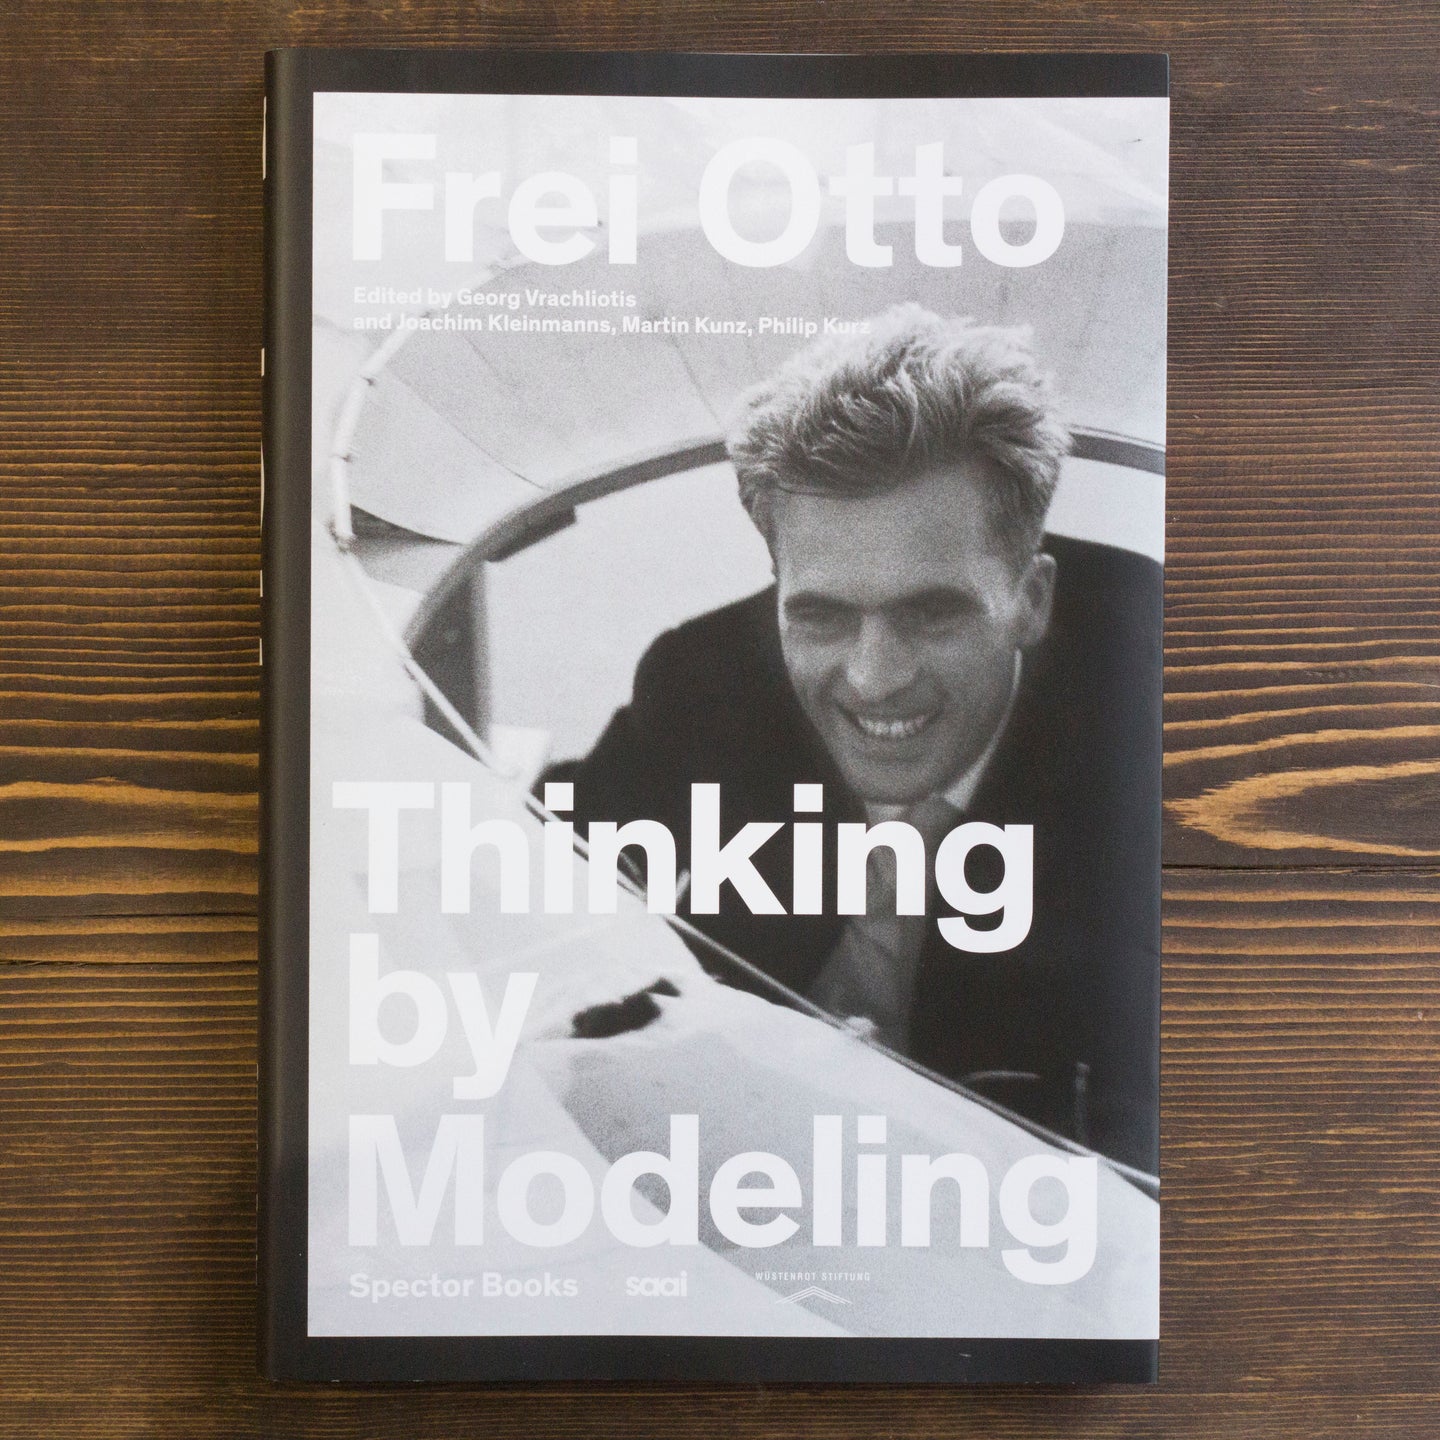 THINKING BY MODELING - FREI OTTO